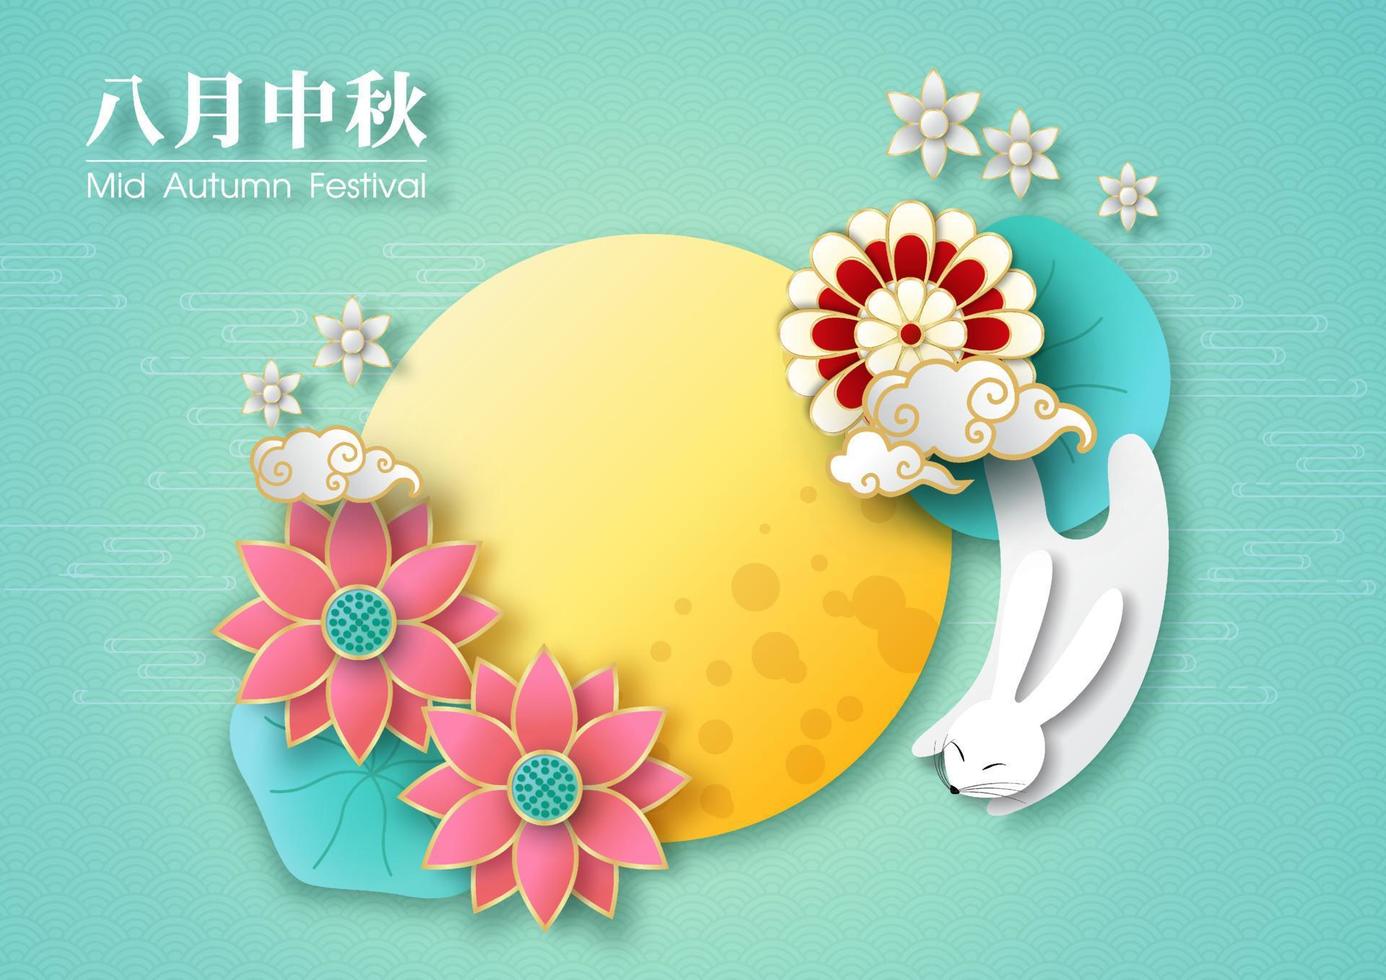 Concept of Chinese mid autumn festival with Chinese texts in paper cut style and vector design. Chinese texts is meaning Mid autumn festival in English.